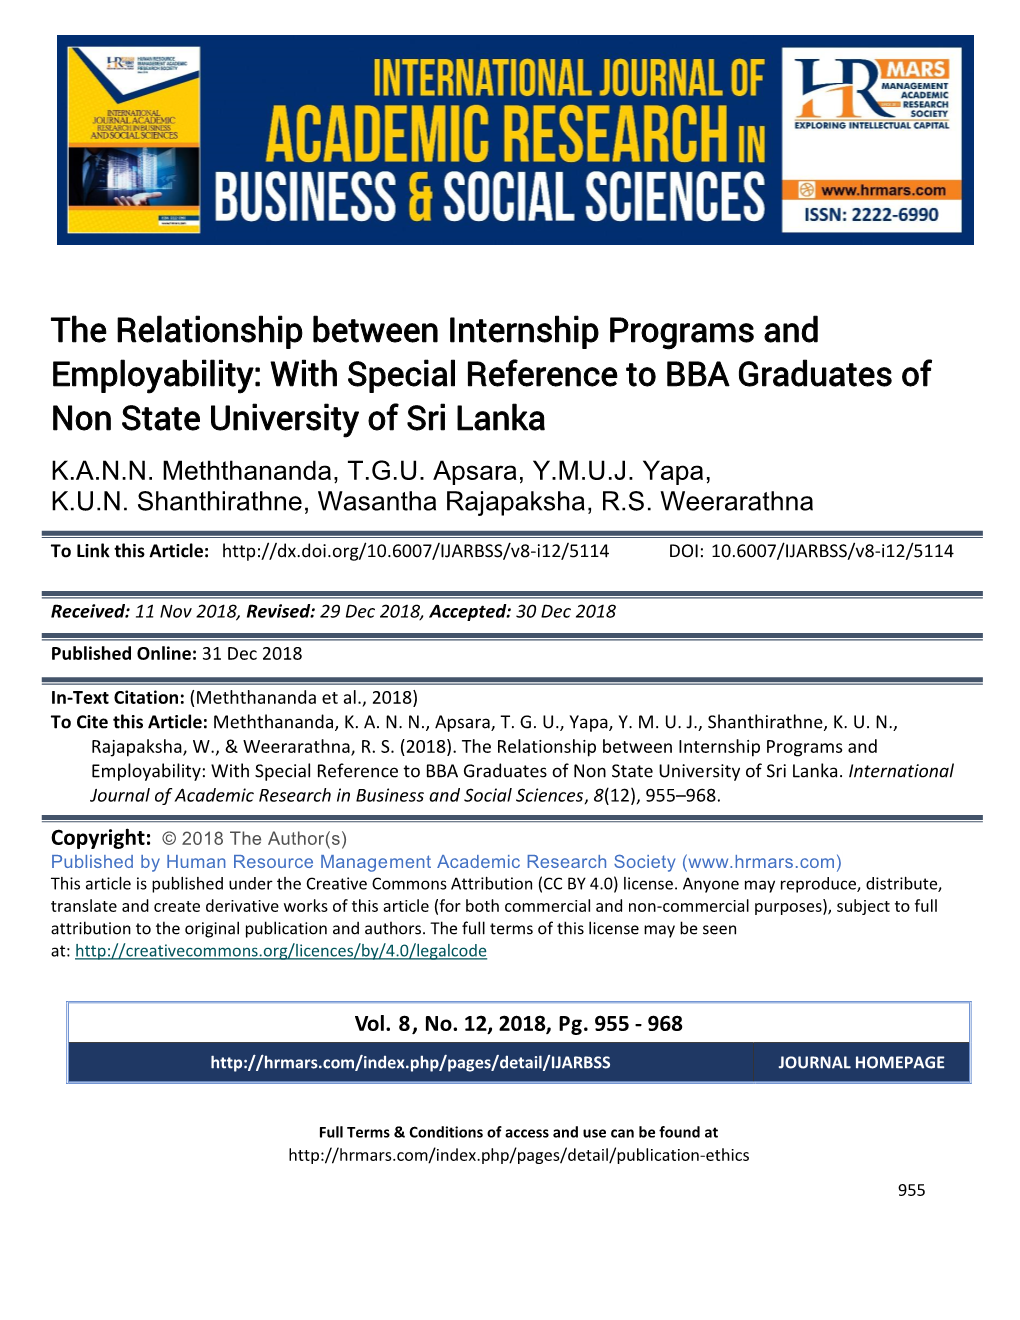 The Relationship Between Internship Programs and Employability: with Special Reference to BBA Graduates of Non State University of Sri Lanka